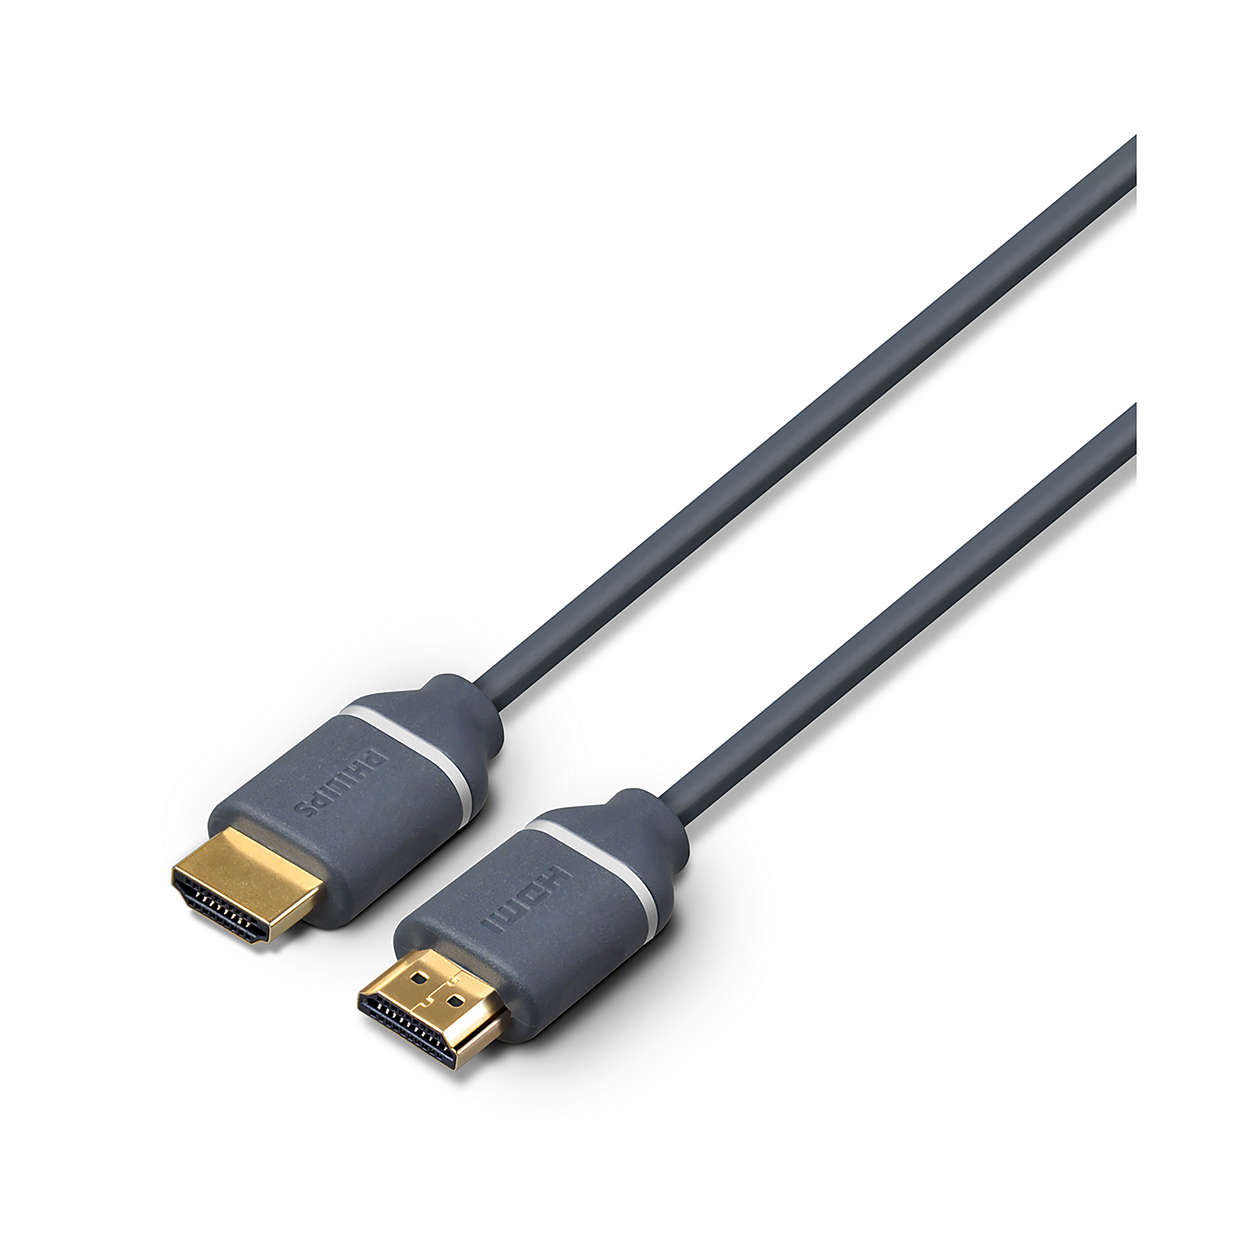 HDMI cable SWV5650G/00 | Philips